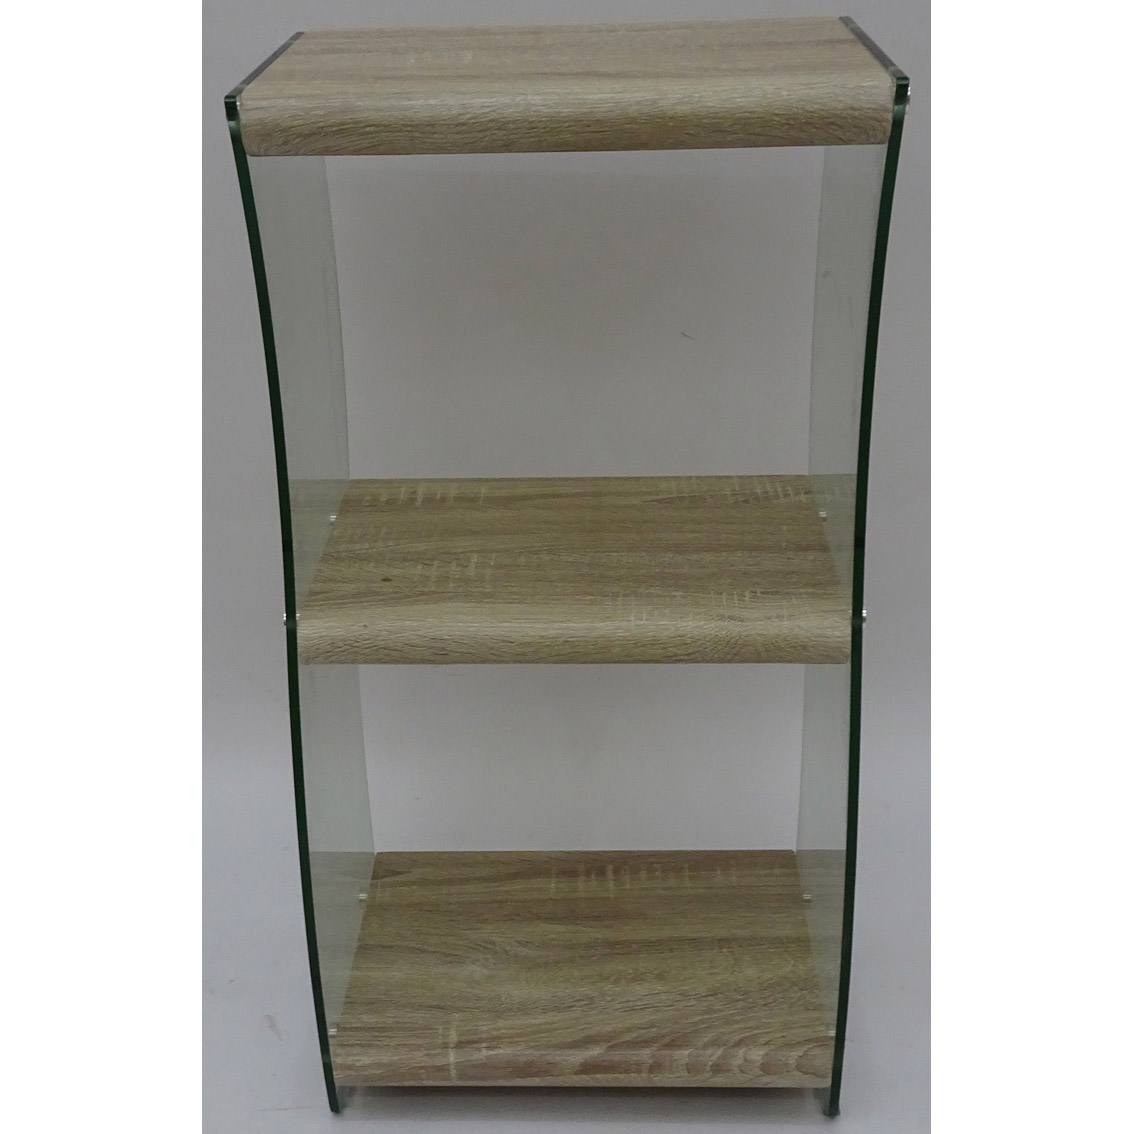 Contemporary curved glass book shelf with wood veneer tiers